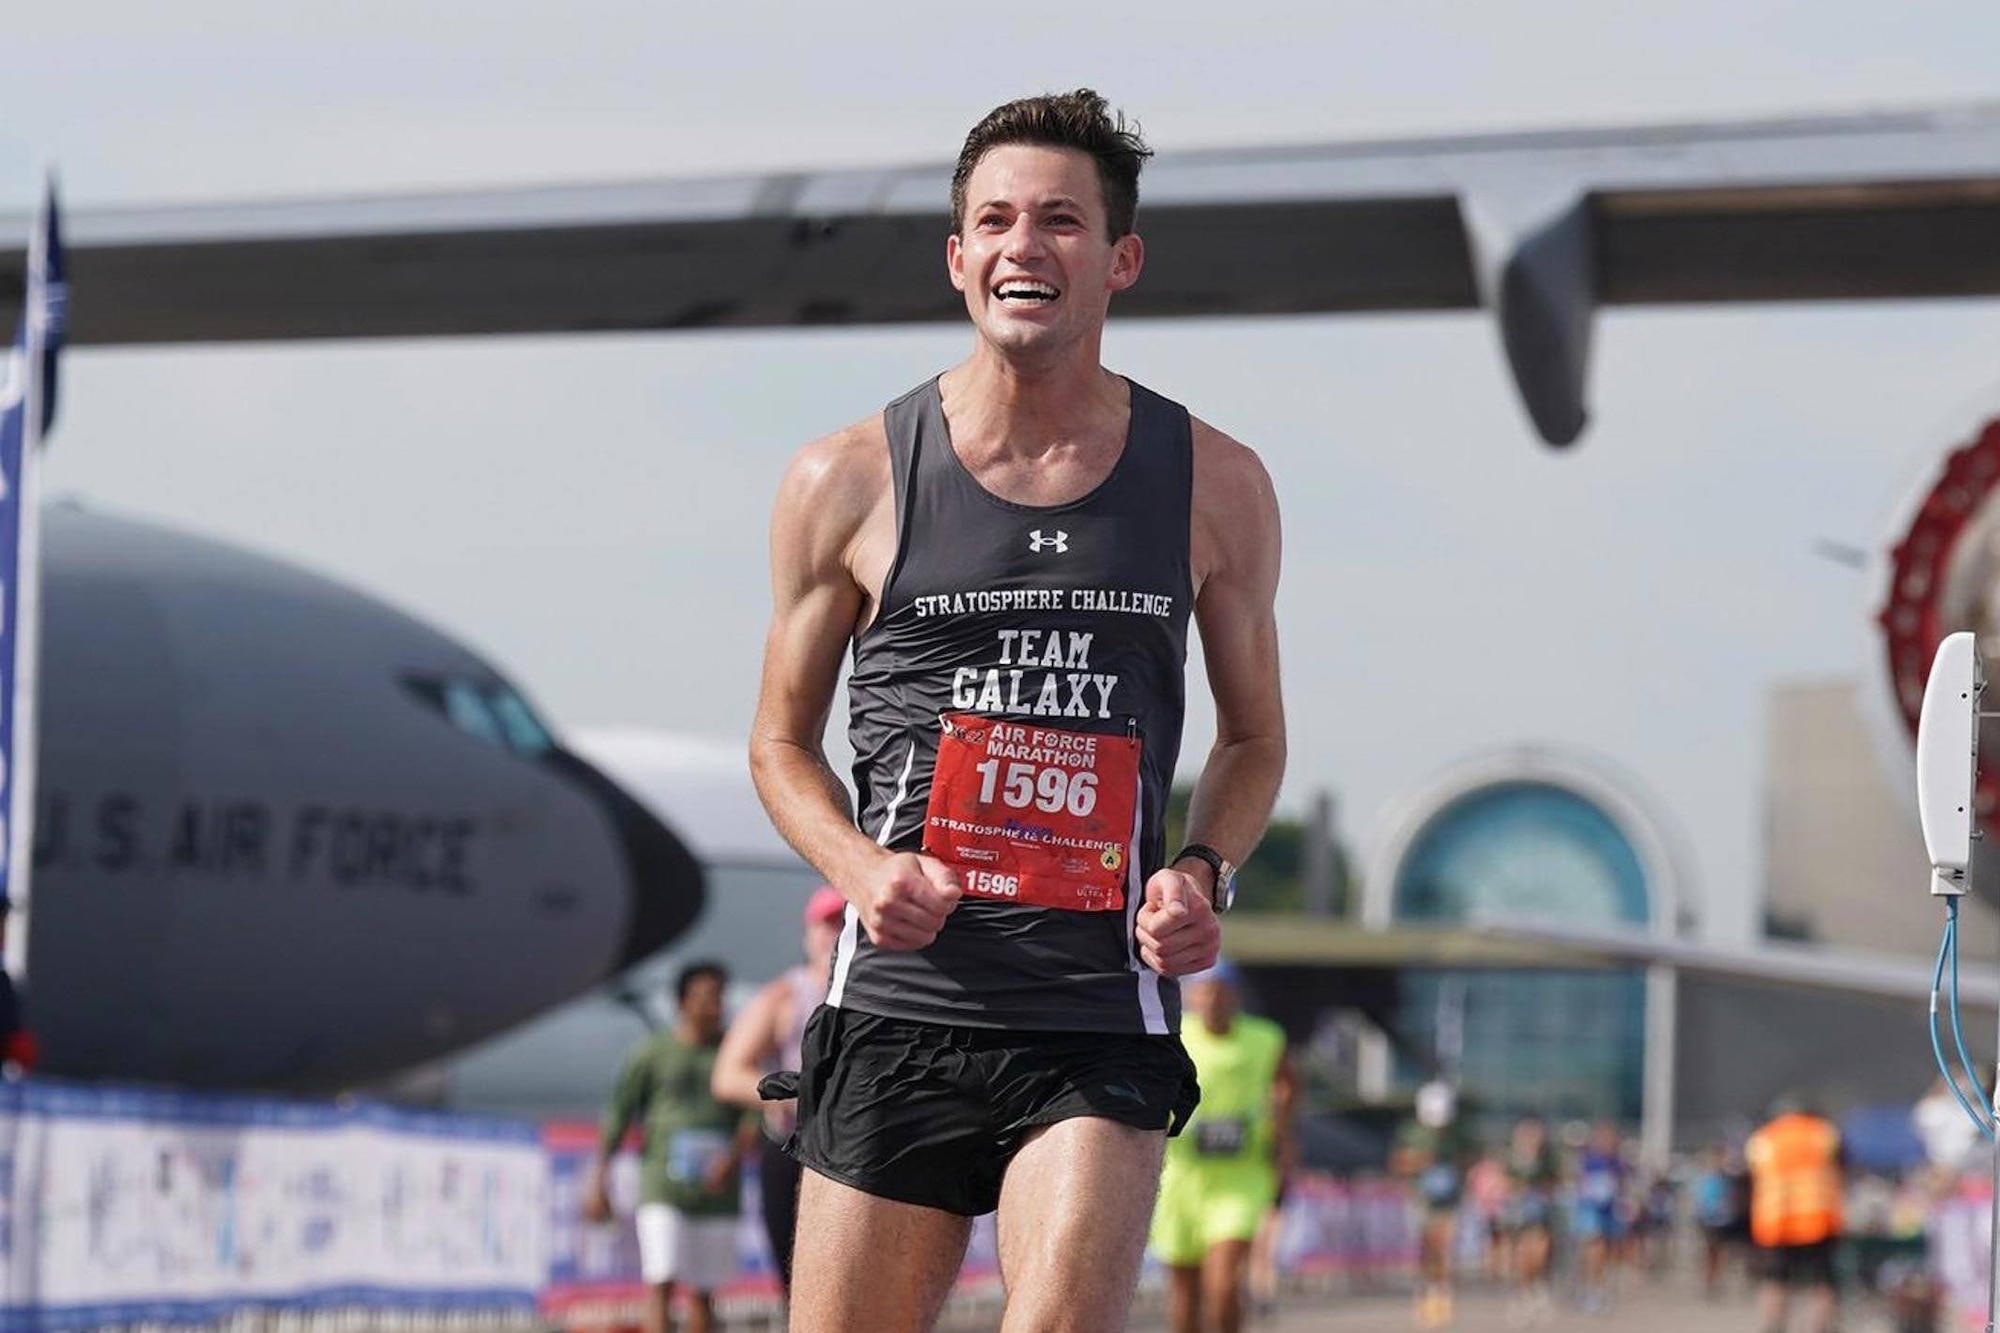 Through the Department of the Air Force Sports program, a life-long dream of running a marathon became an affordable reality for one U.S. Space Force Guardian.